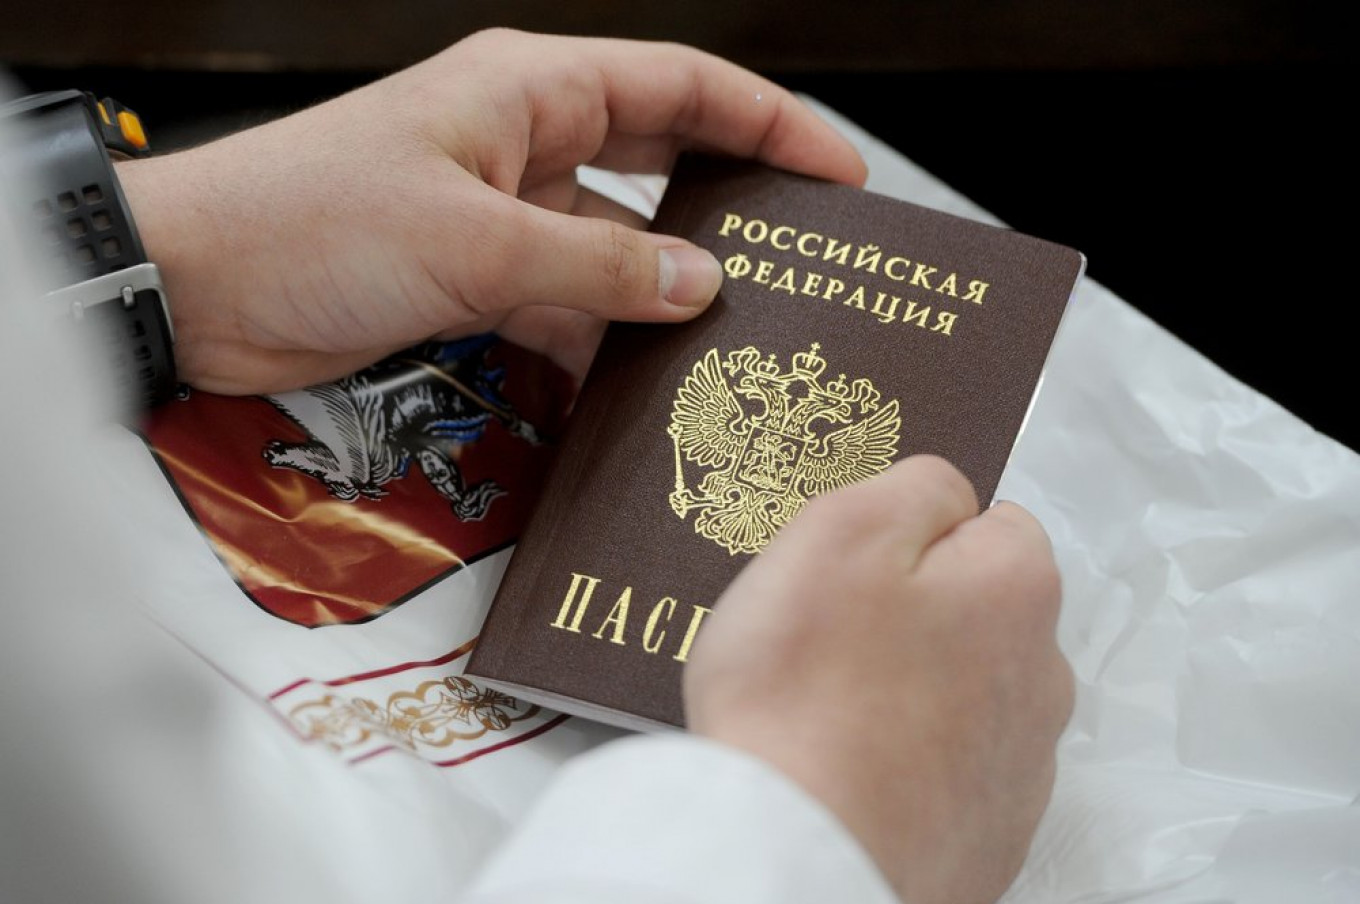 Russia Passes Dual Citizenship Law, Hoping to Add 10M Citizens